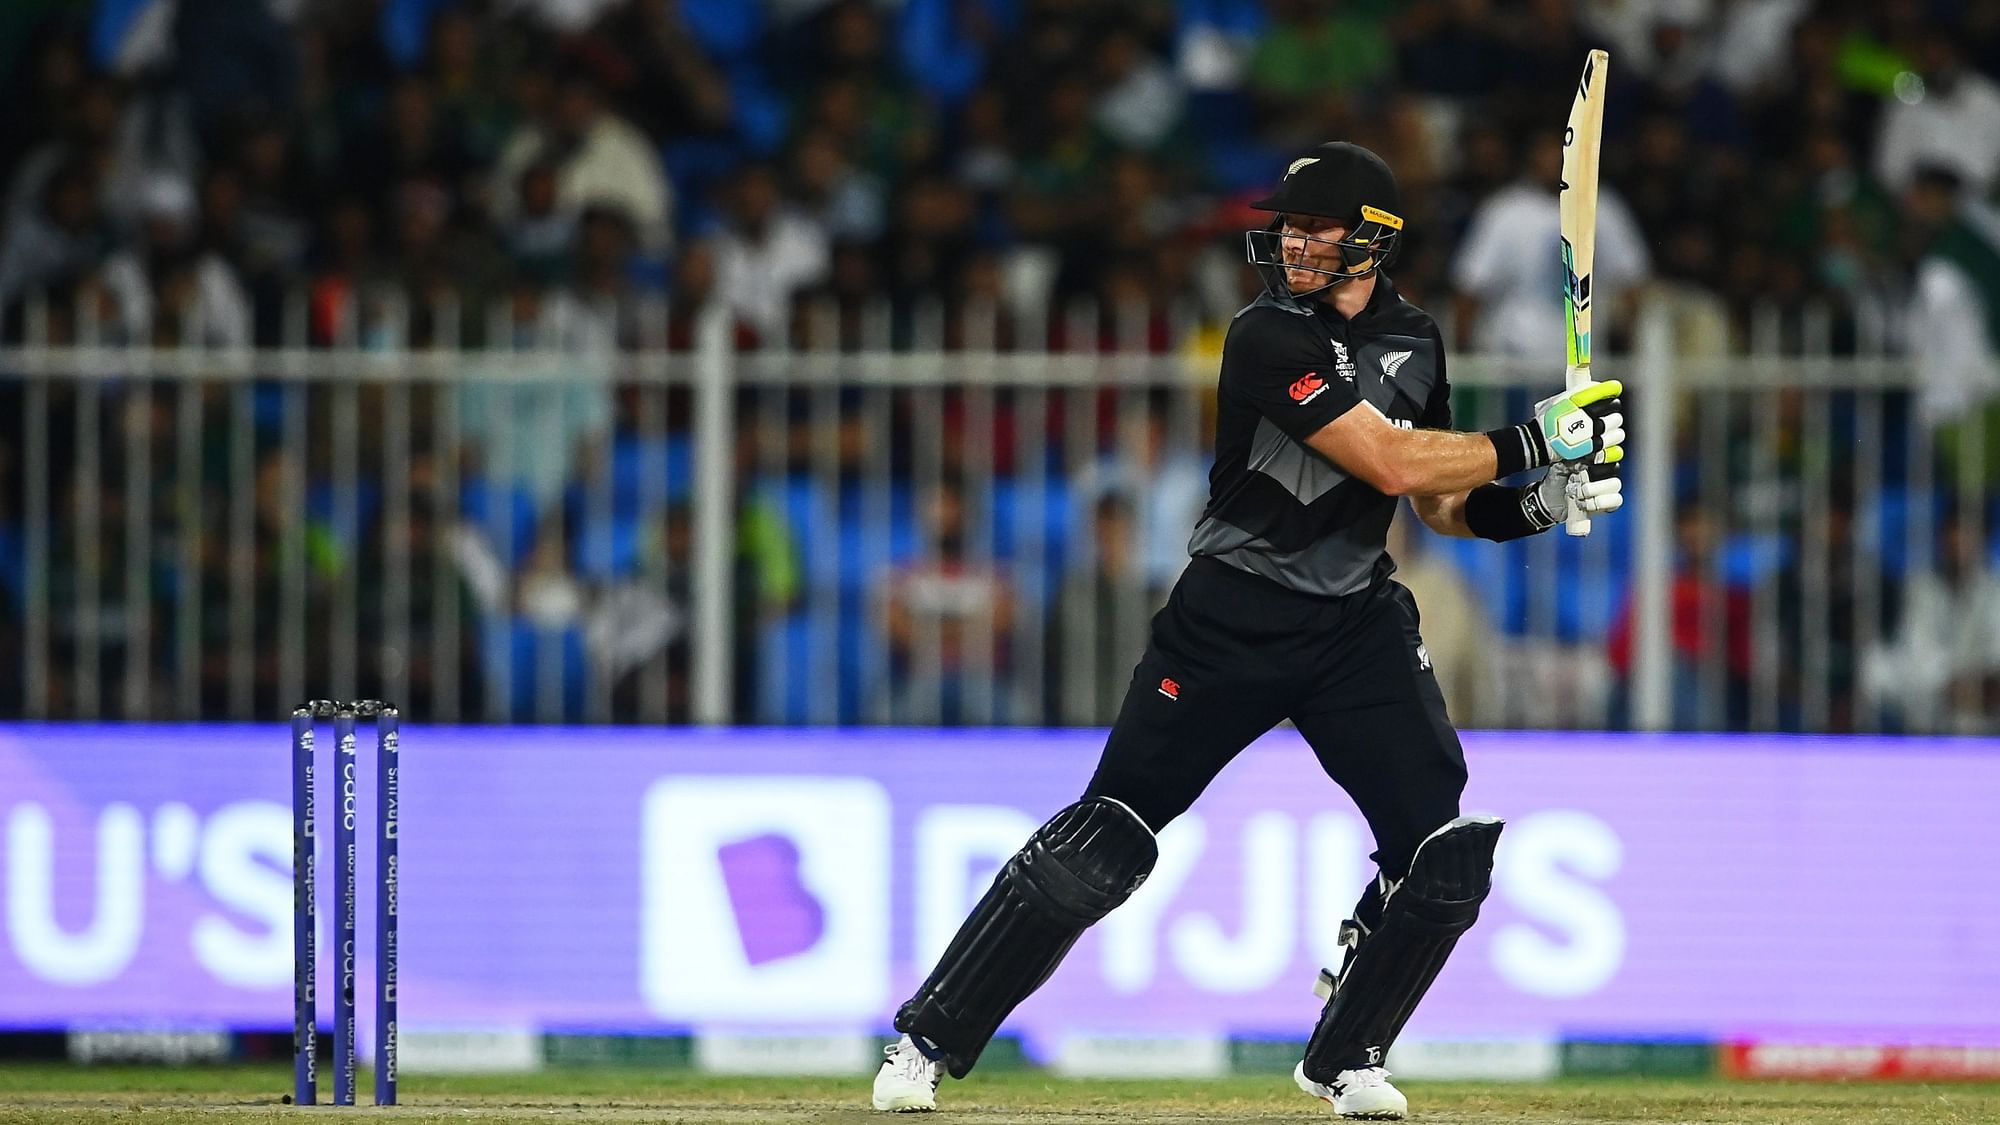 2021 T20 World Cup: Martin Guptill Cleared to Play Against India